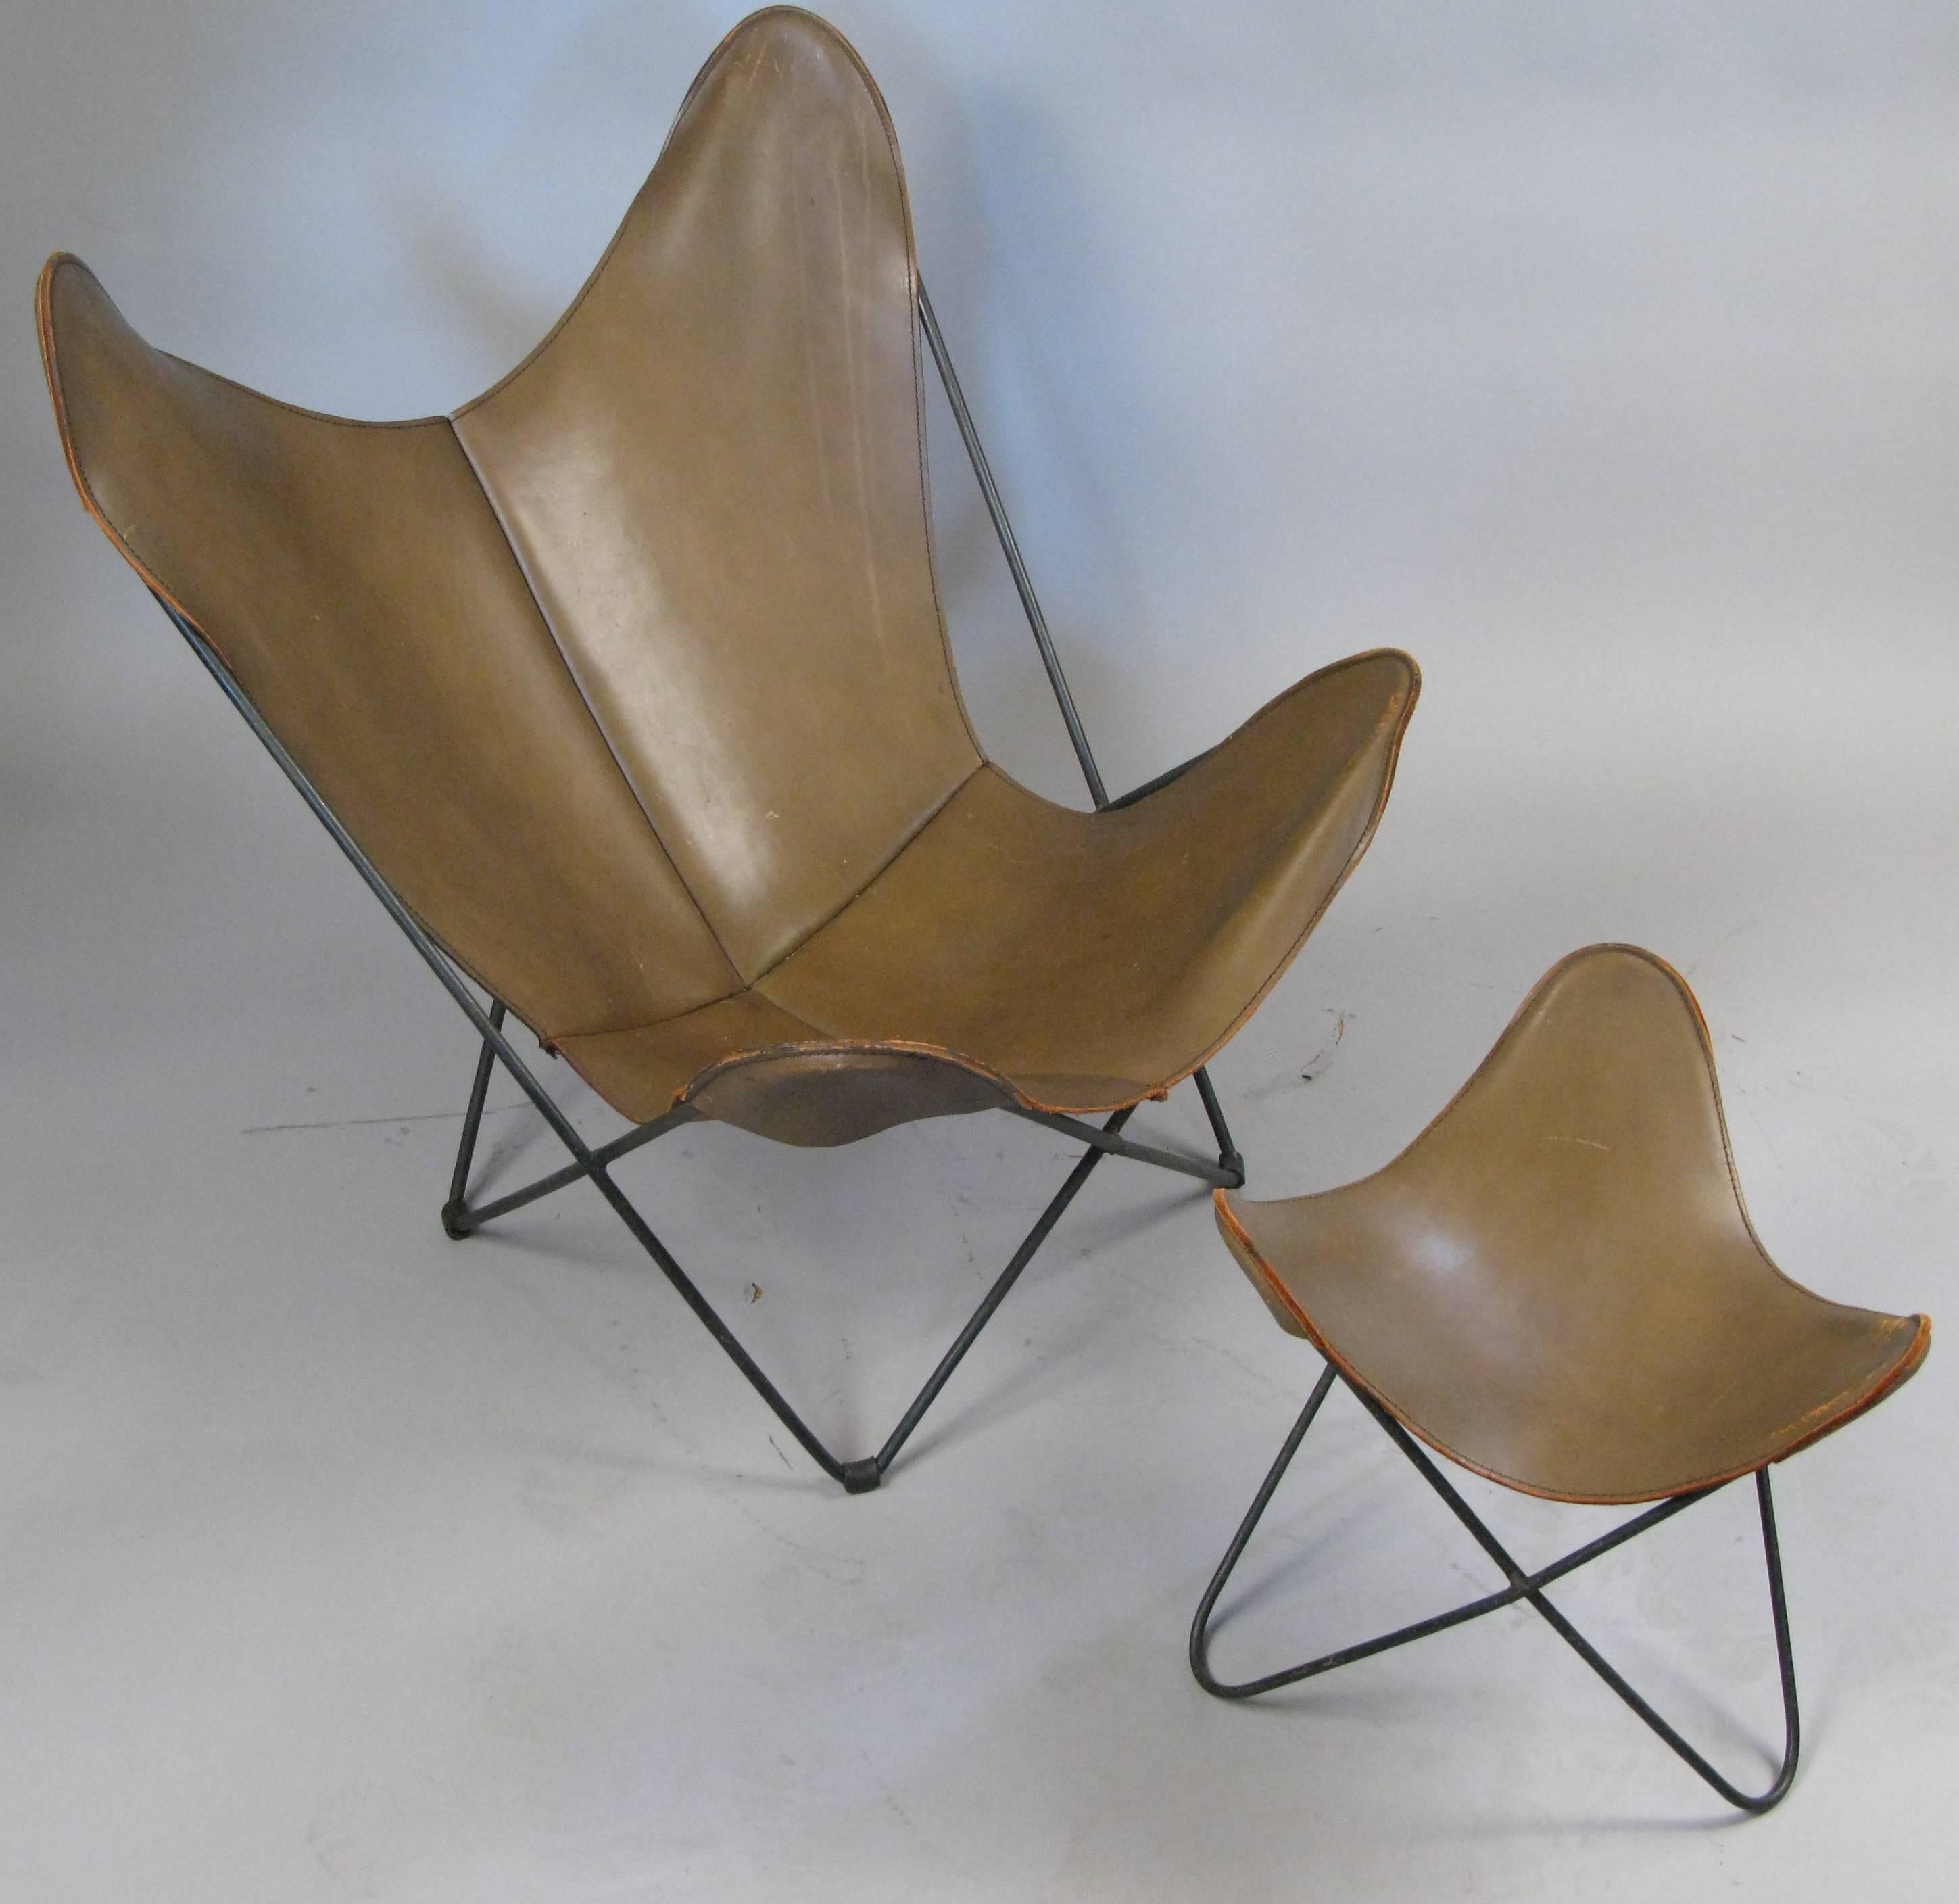 Beautiful leather butterfly lounge chair and ottoman designed by Jorge Ferrari-Hardoy for Knoll Associates. Rare original vintage chair with ottoman, with original leather on both pieces in a Classic green/brown color.